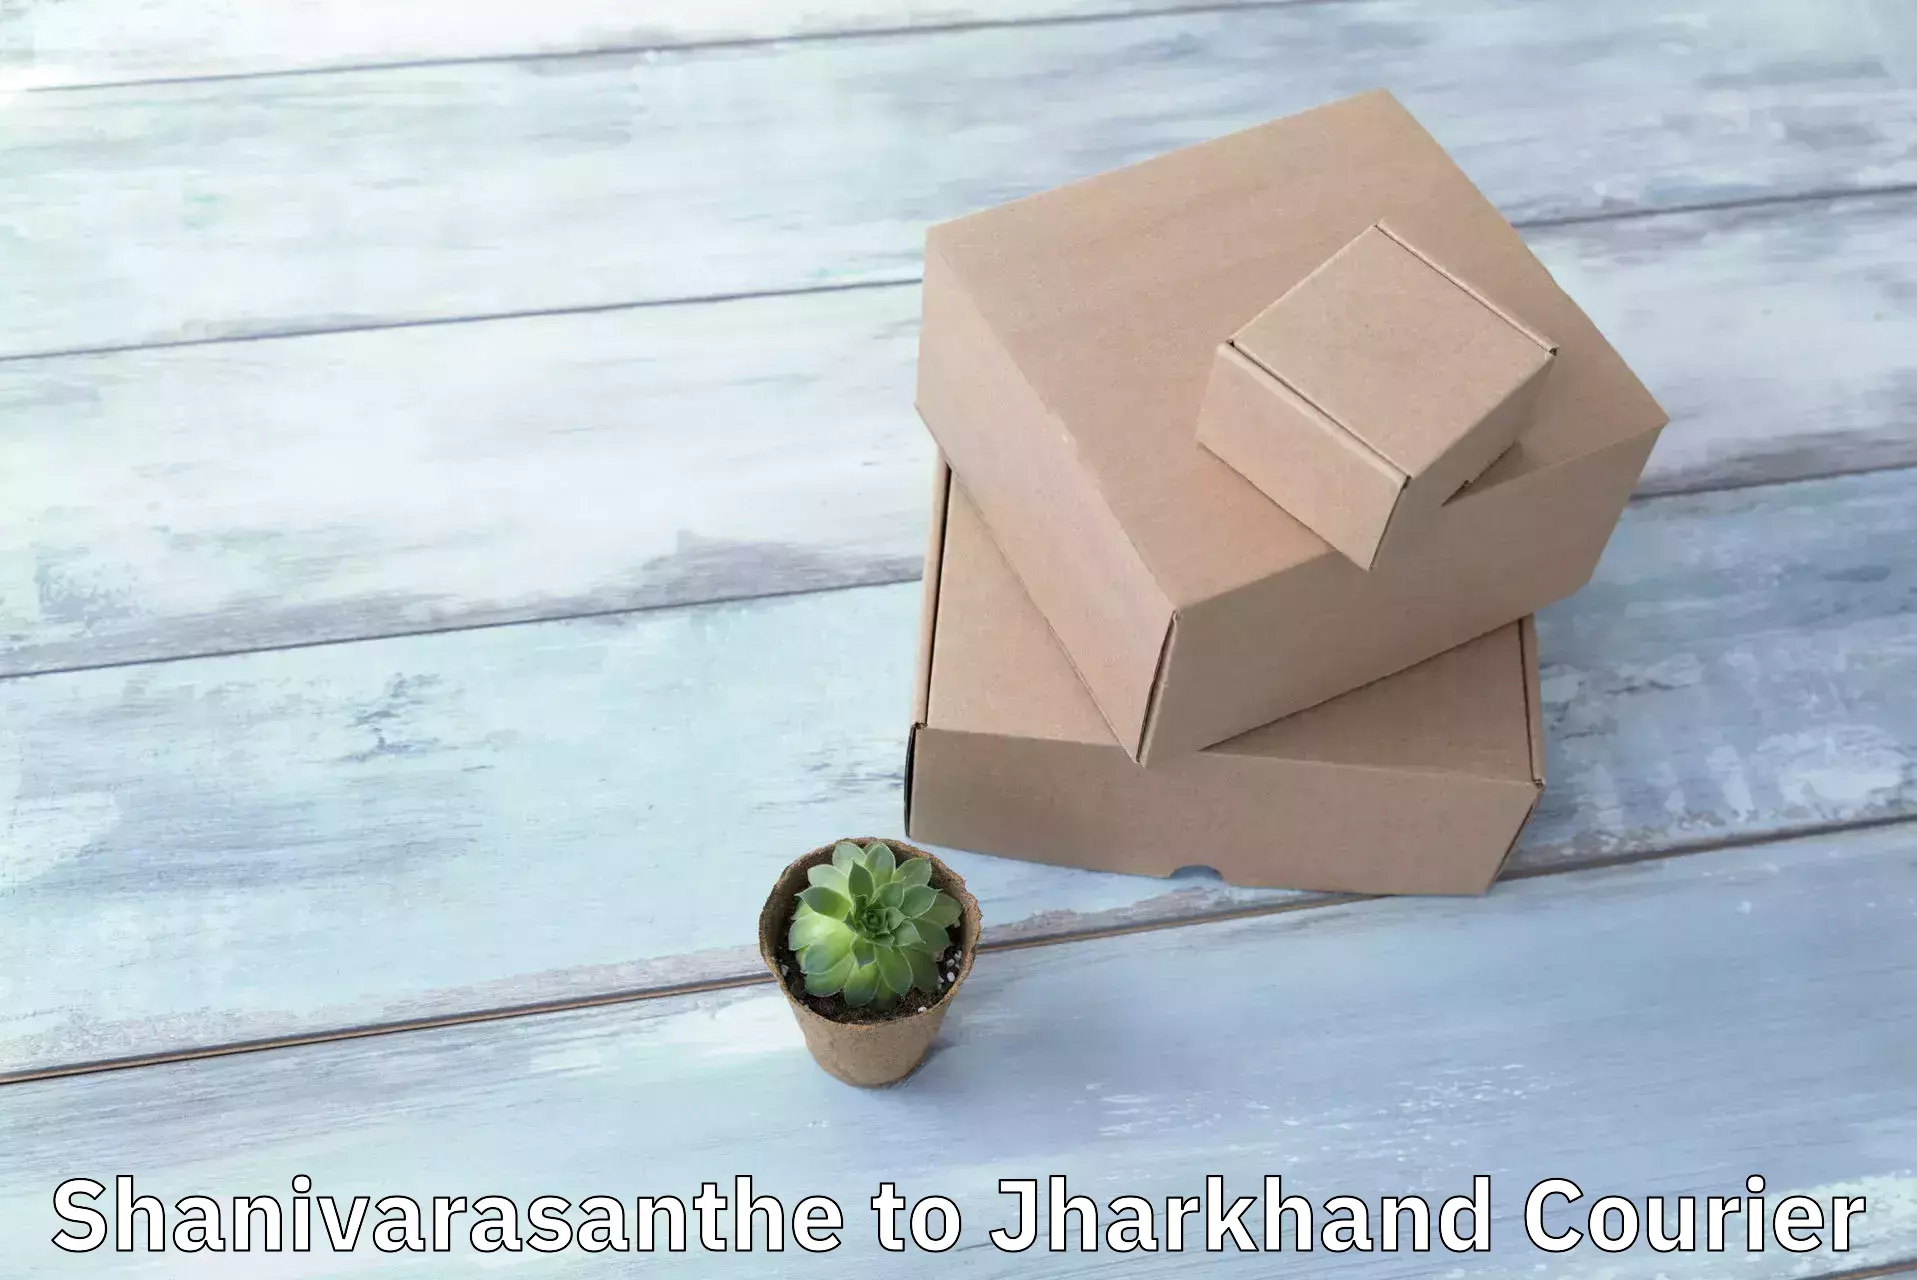 Express delivery network Shanivarasanthe to Jharkhand